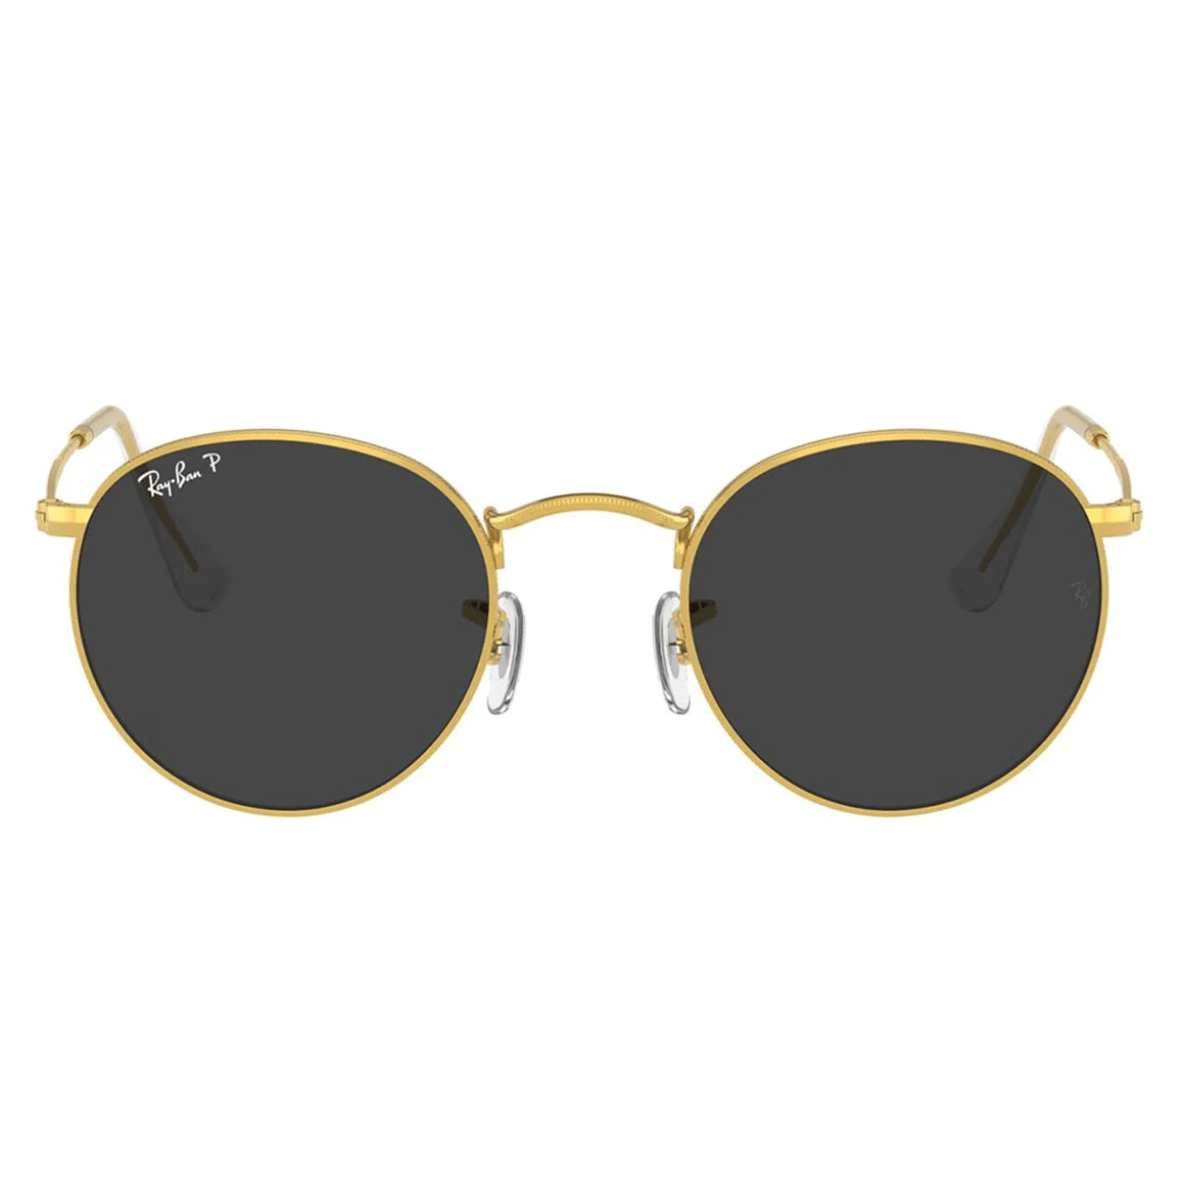 "Sleek Ray-Ban 3447 round sunglasses with gold frames, displayed against a minimalist background at Optorium."